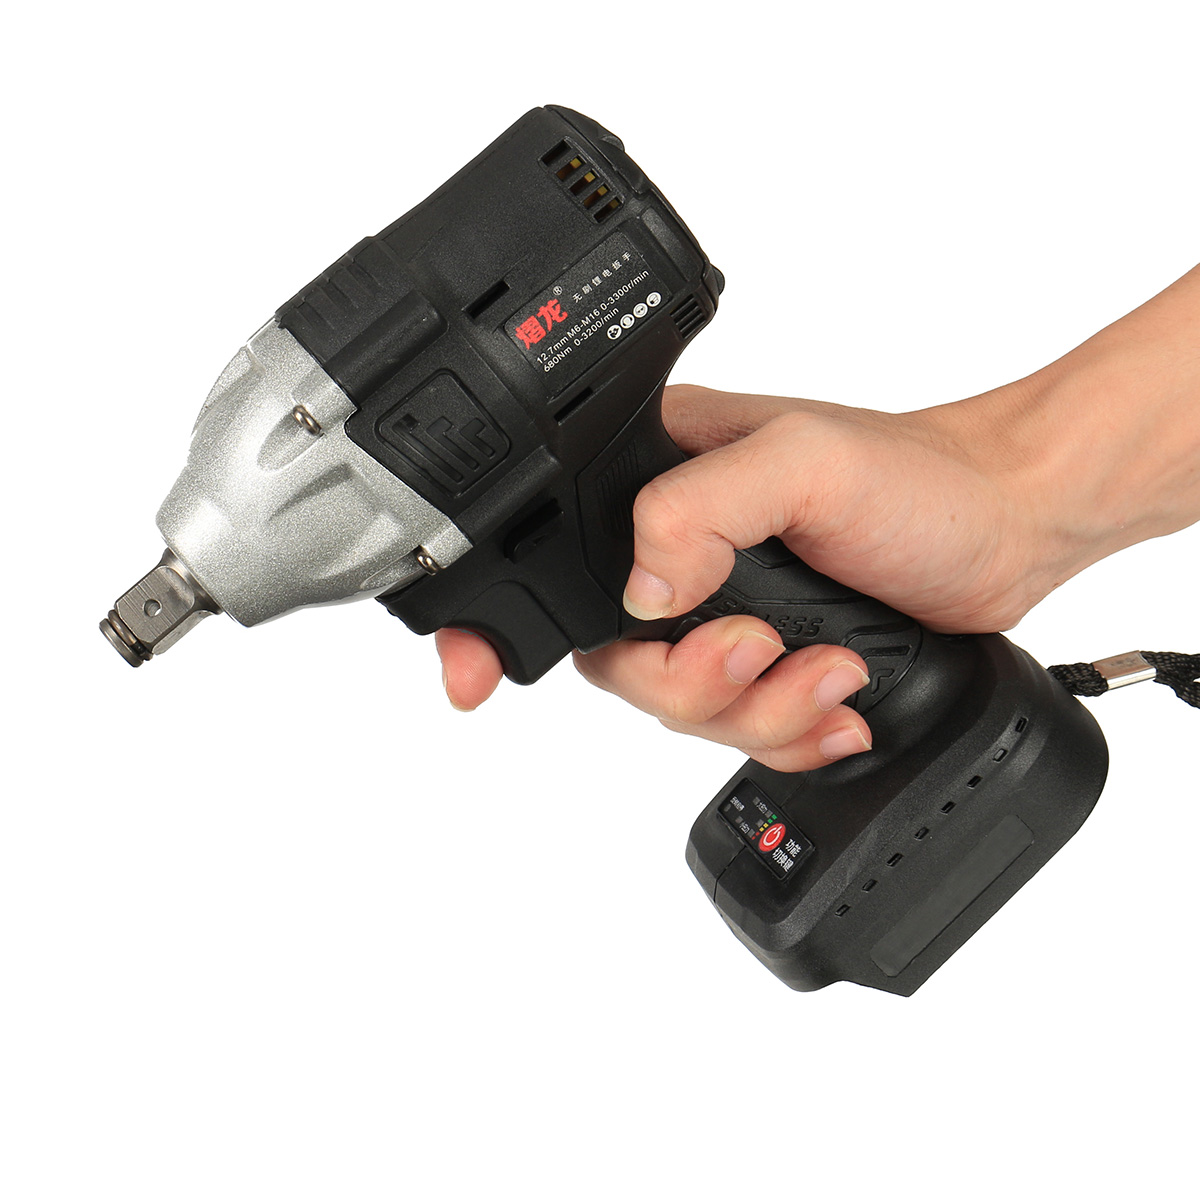 100-240V-21V-Cordless-Brushless-Electric-Wrench-600Nm-Impact-Wrench-20000mAh-Recharge-1790565-9